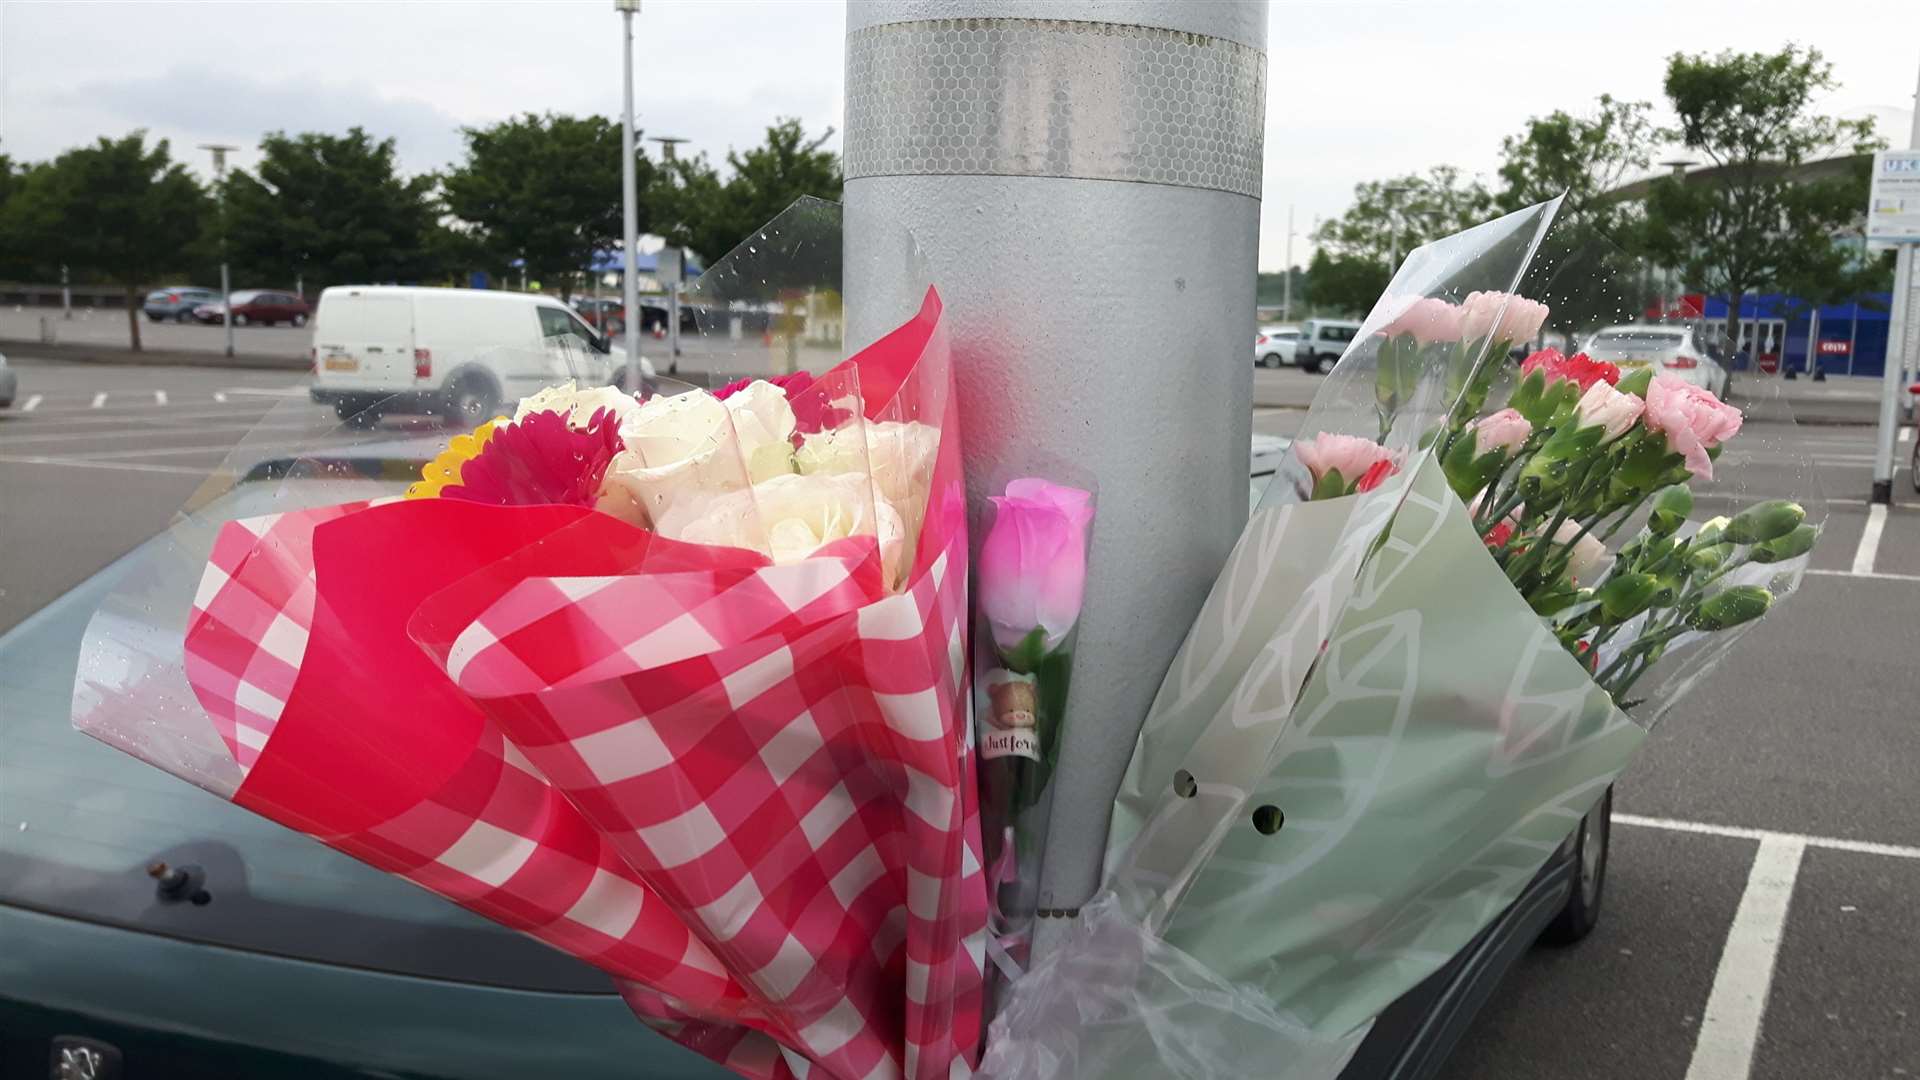 Floral tributes were left at the scene of Molly's death